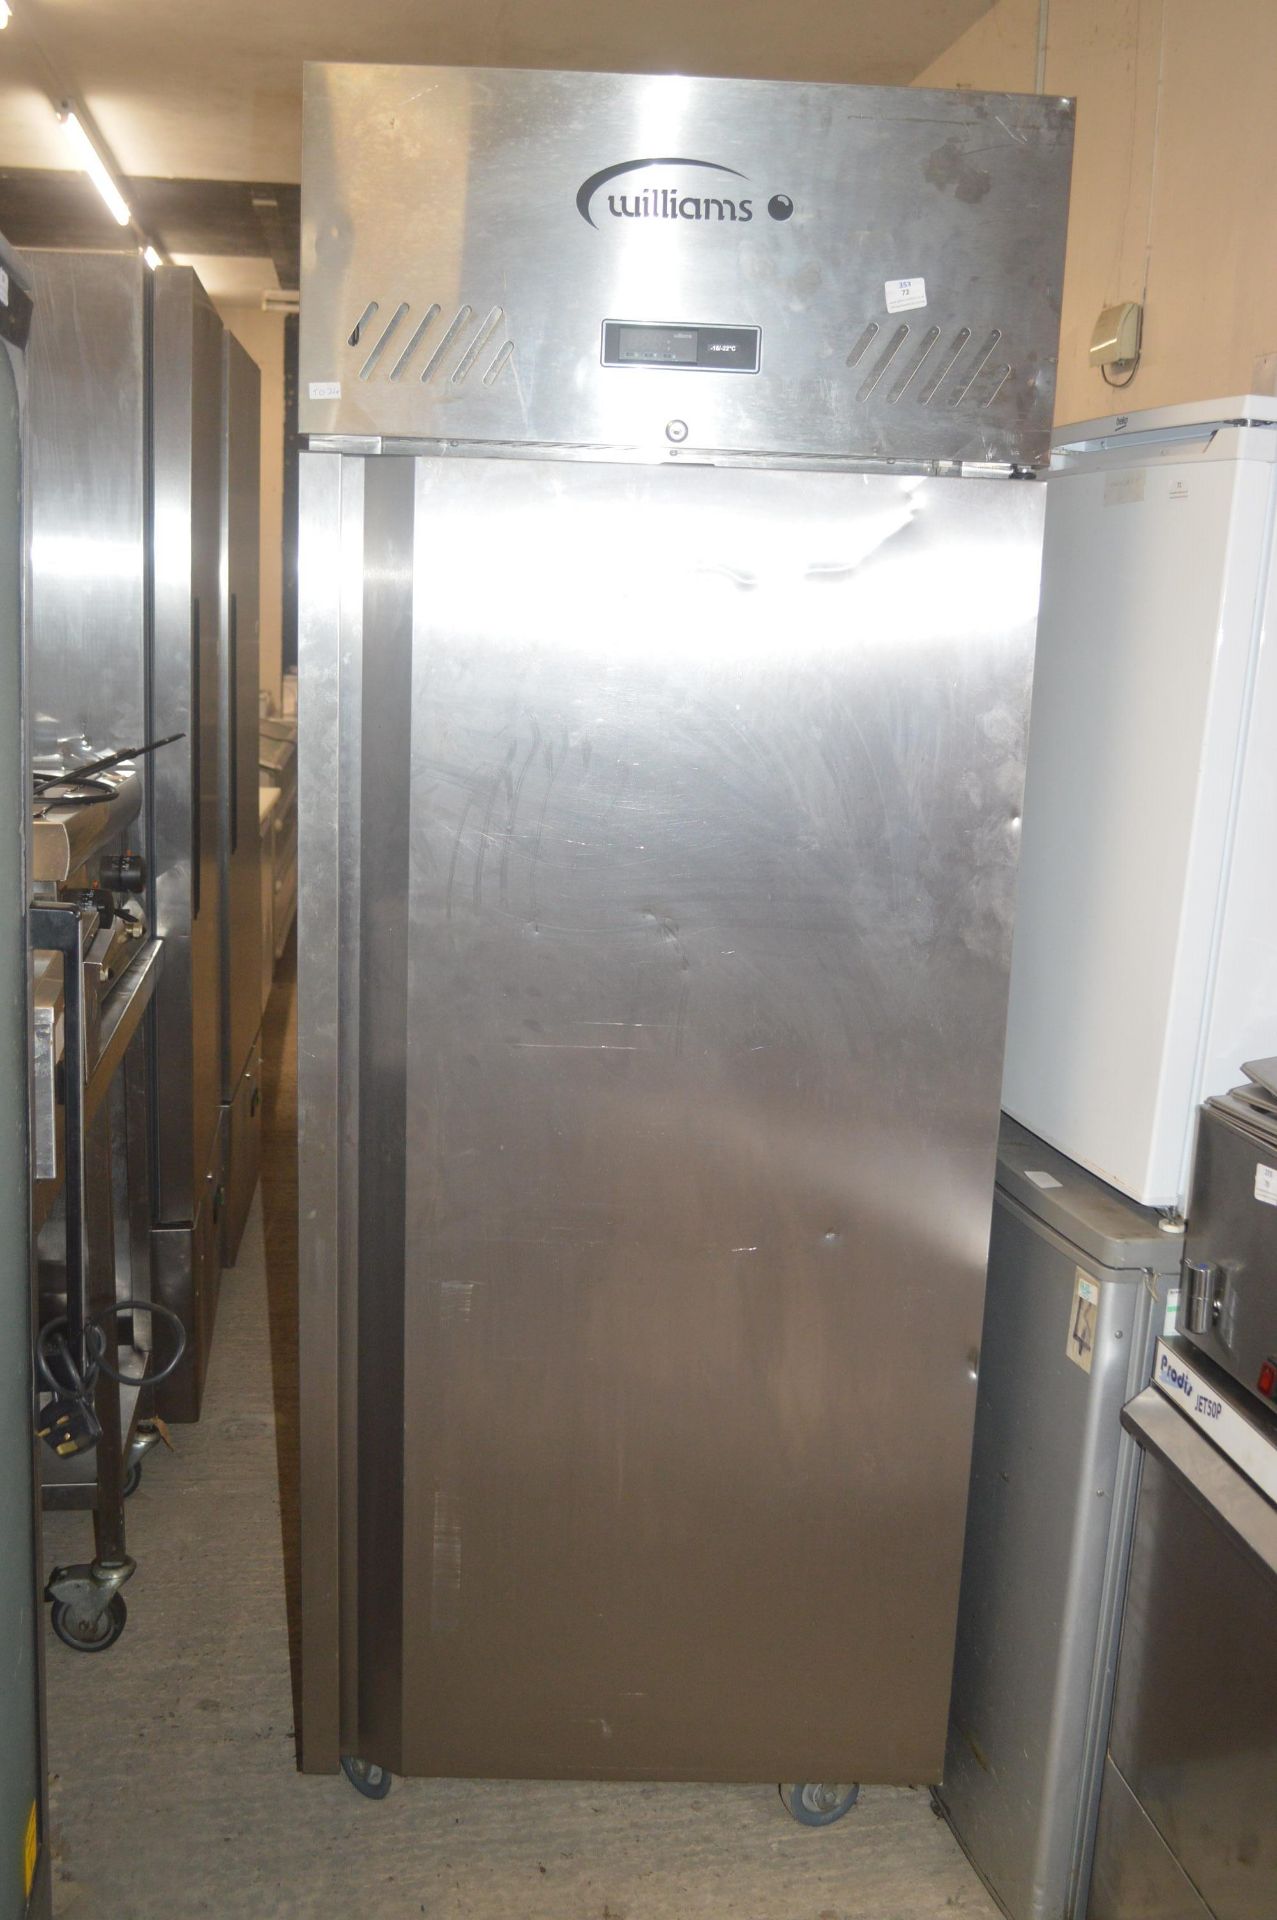 *Williams Stainless Steel Upright Refrigerator